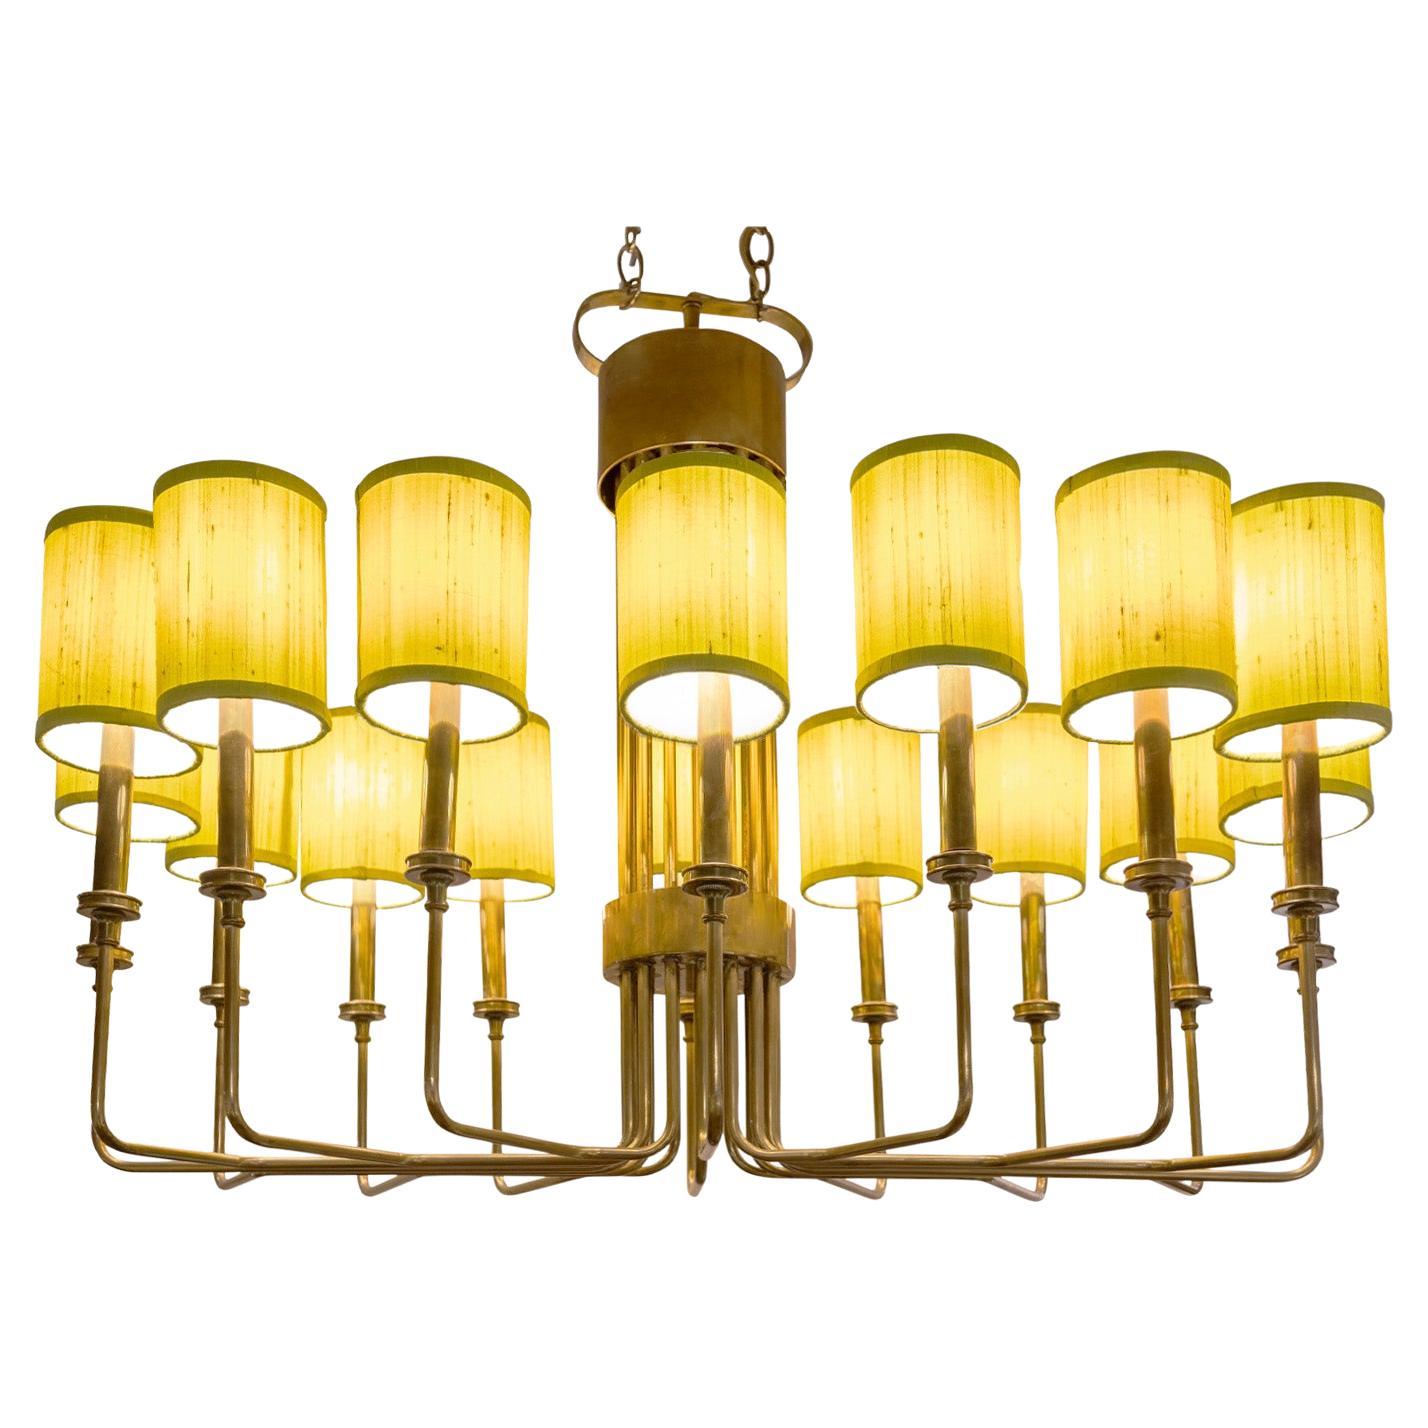 Parzinger Style Large and Impressive Chandelier in Brass, 1950s For Sale